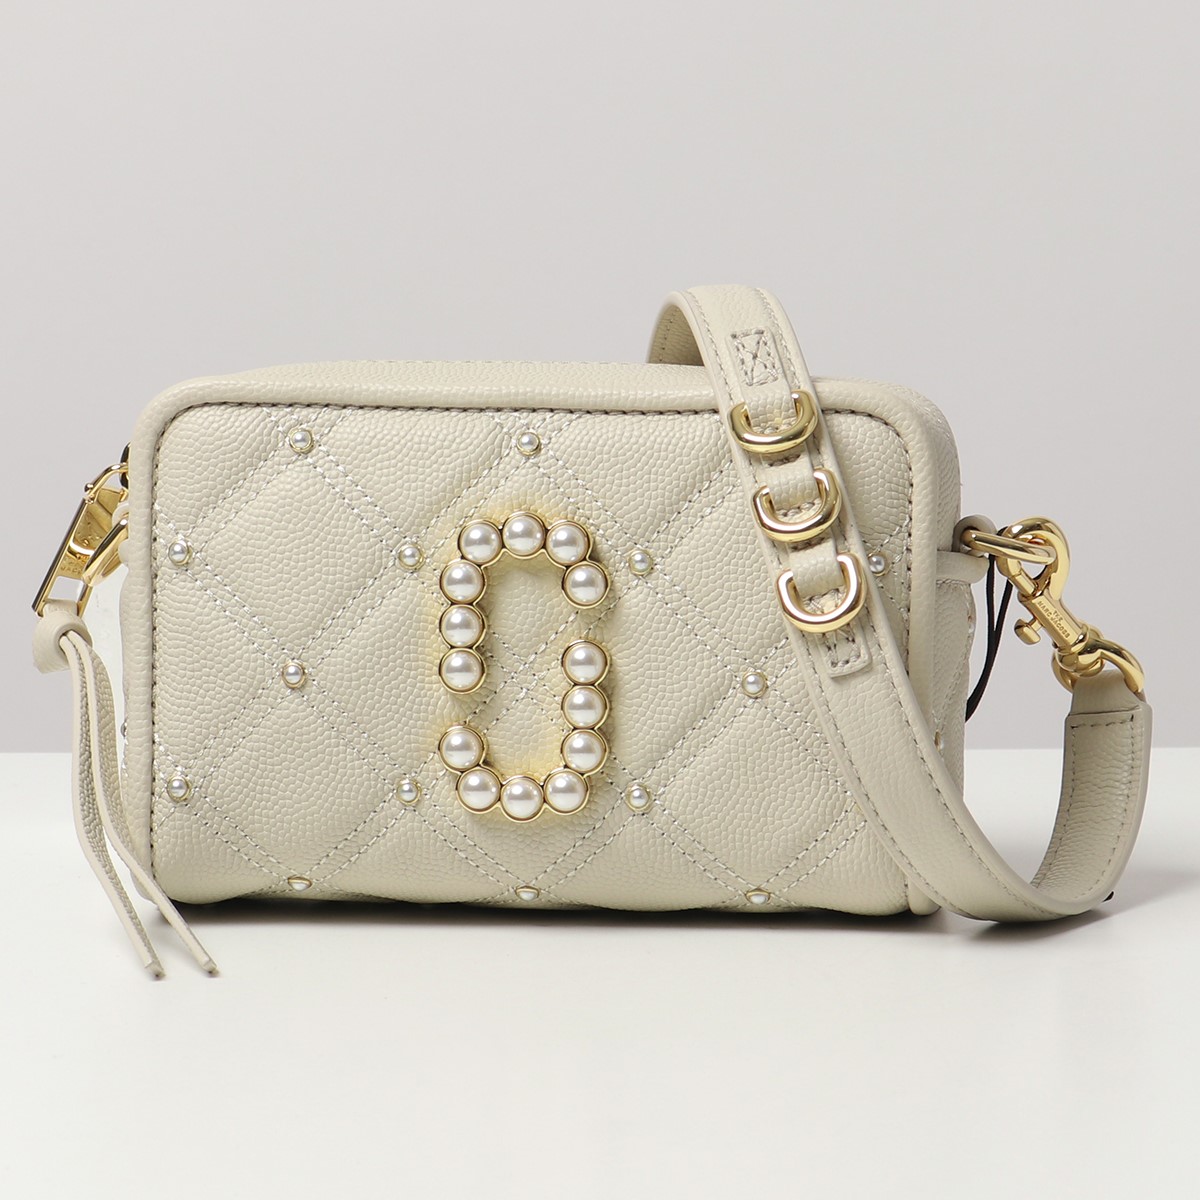 MARC JACOBS マークジェイコブス M0016810 THE QUILTED SOFTSHOT 17 WITH PEARLS カラー2色  キルティングレザー パール ショルダーバッグ ポシェット 鞄 レディース | インポートセレクト musee